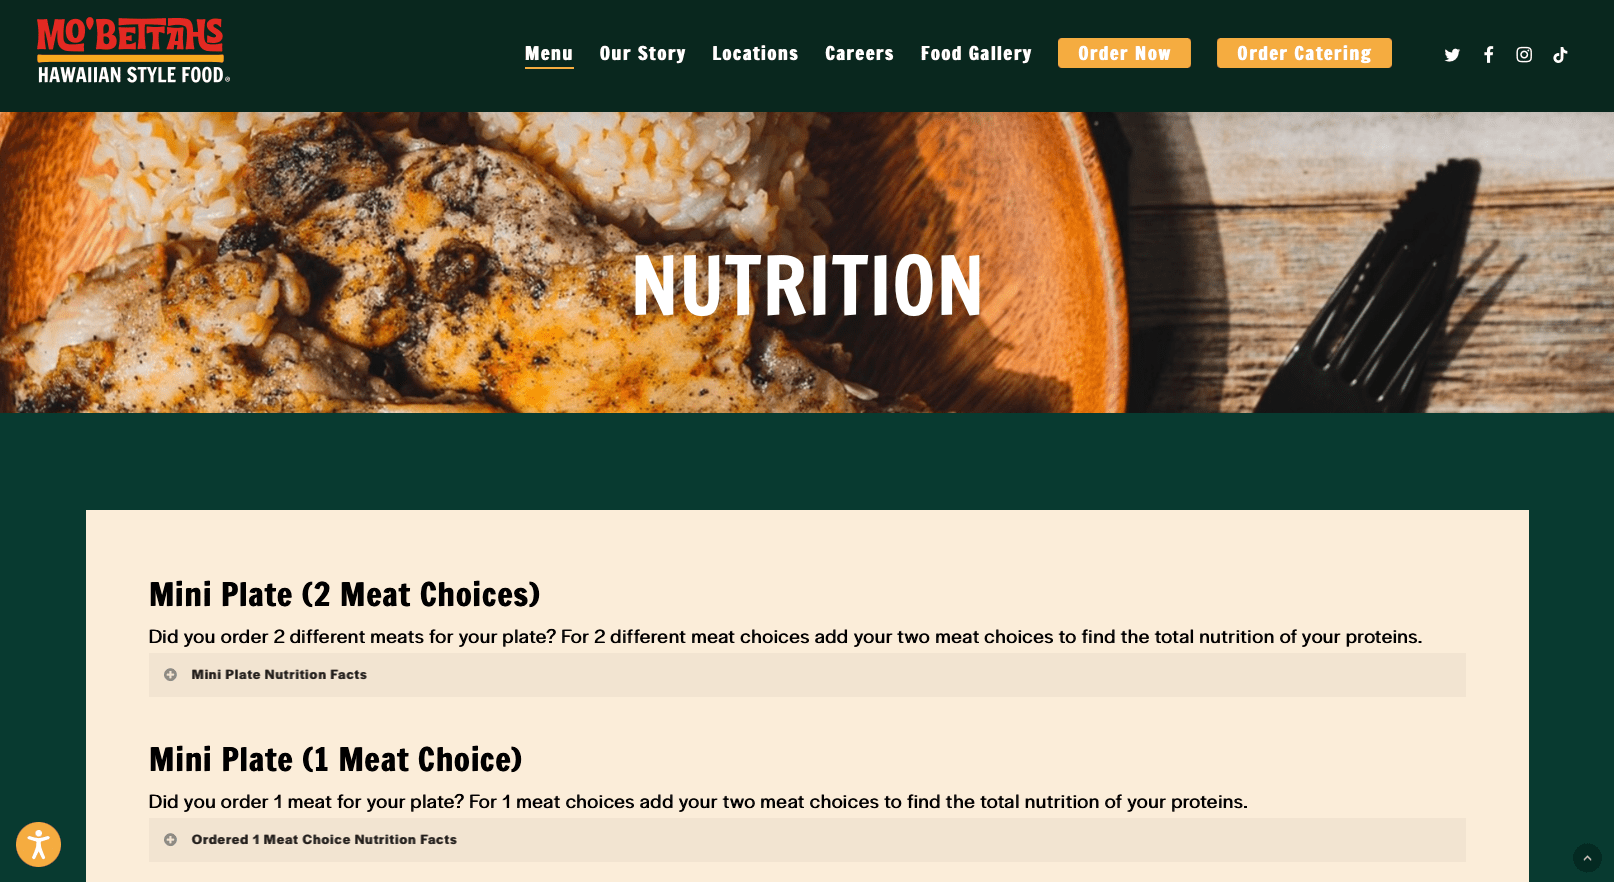 Mo'bettahs nutritional facts web page informational and customization.